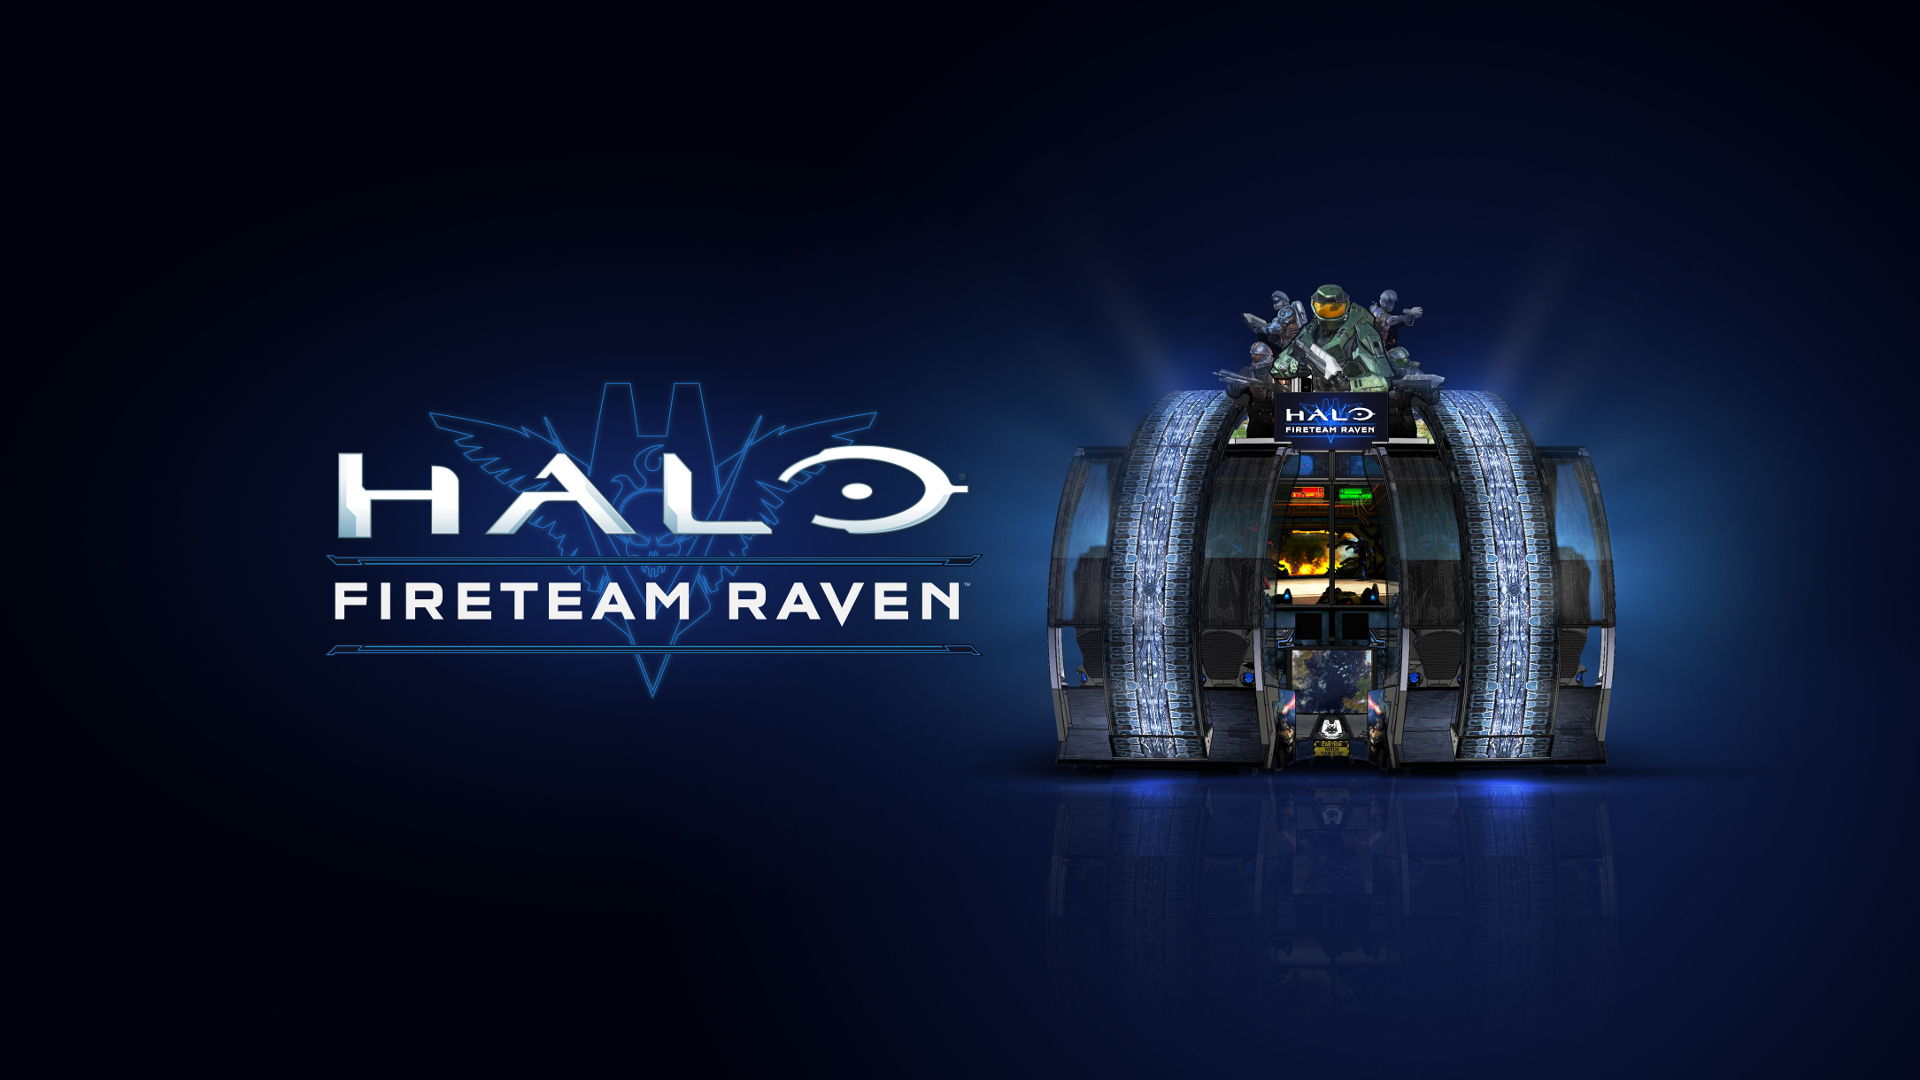 Video For Introducing Halo: Fireteam Raven